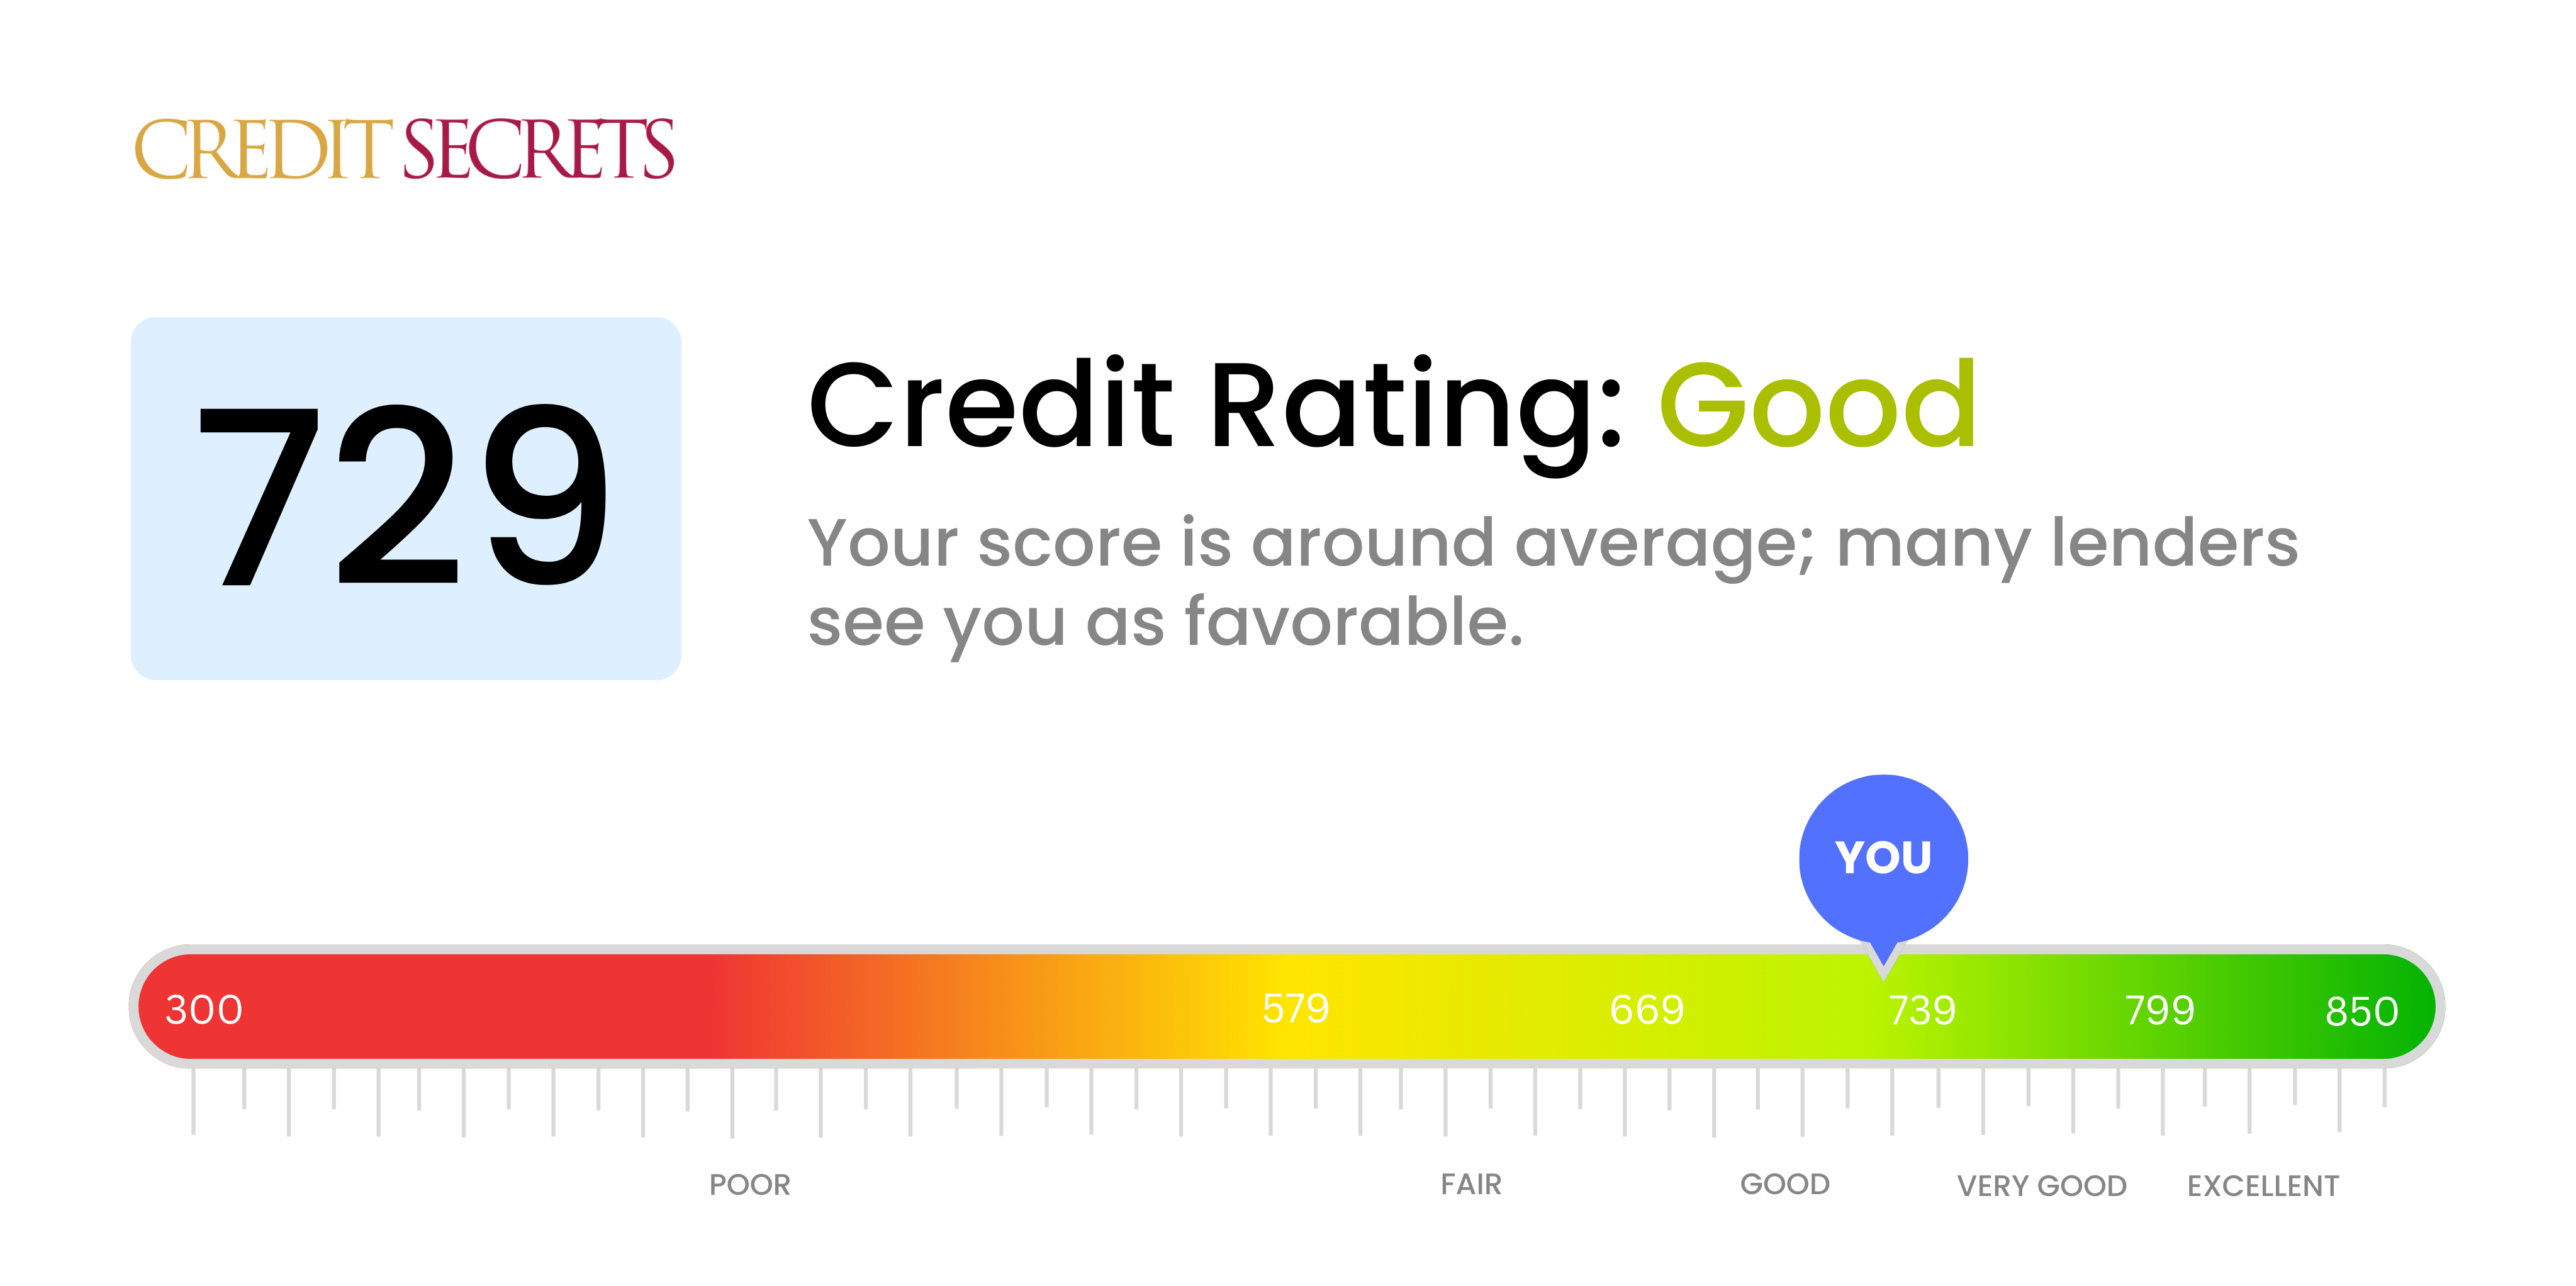 Is 729 a good credit score?